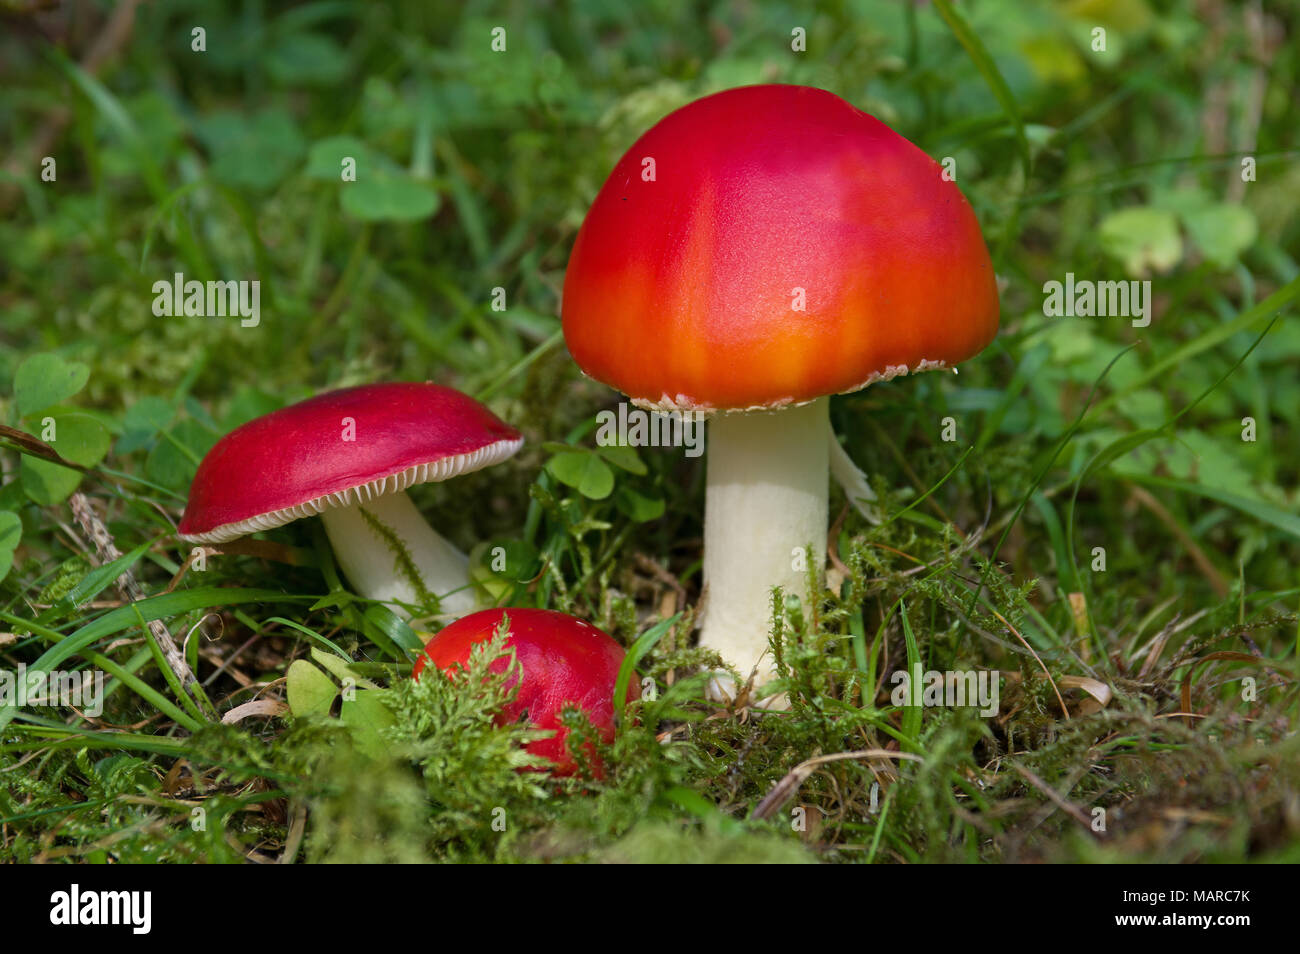 Most red fungi a poisonous, so be careful ! In this case: Sickener Mushroom, Emetic Russula (Russula emetica) to the left, Fly Agaric (Amanita muscaria) to the right. Germany Stock Photo